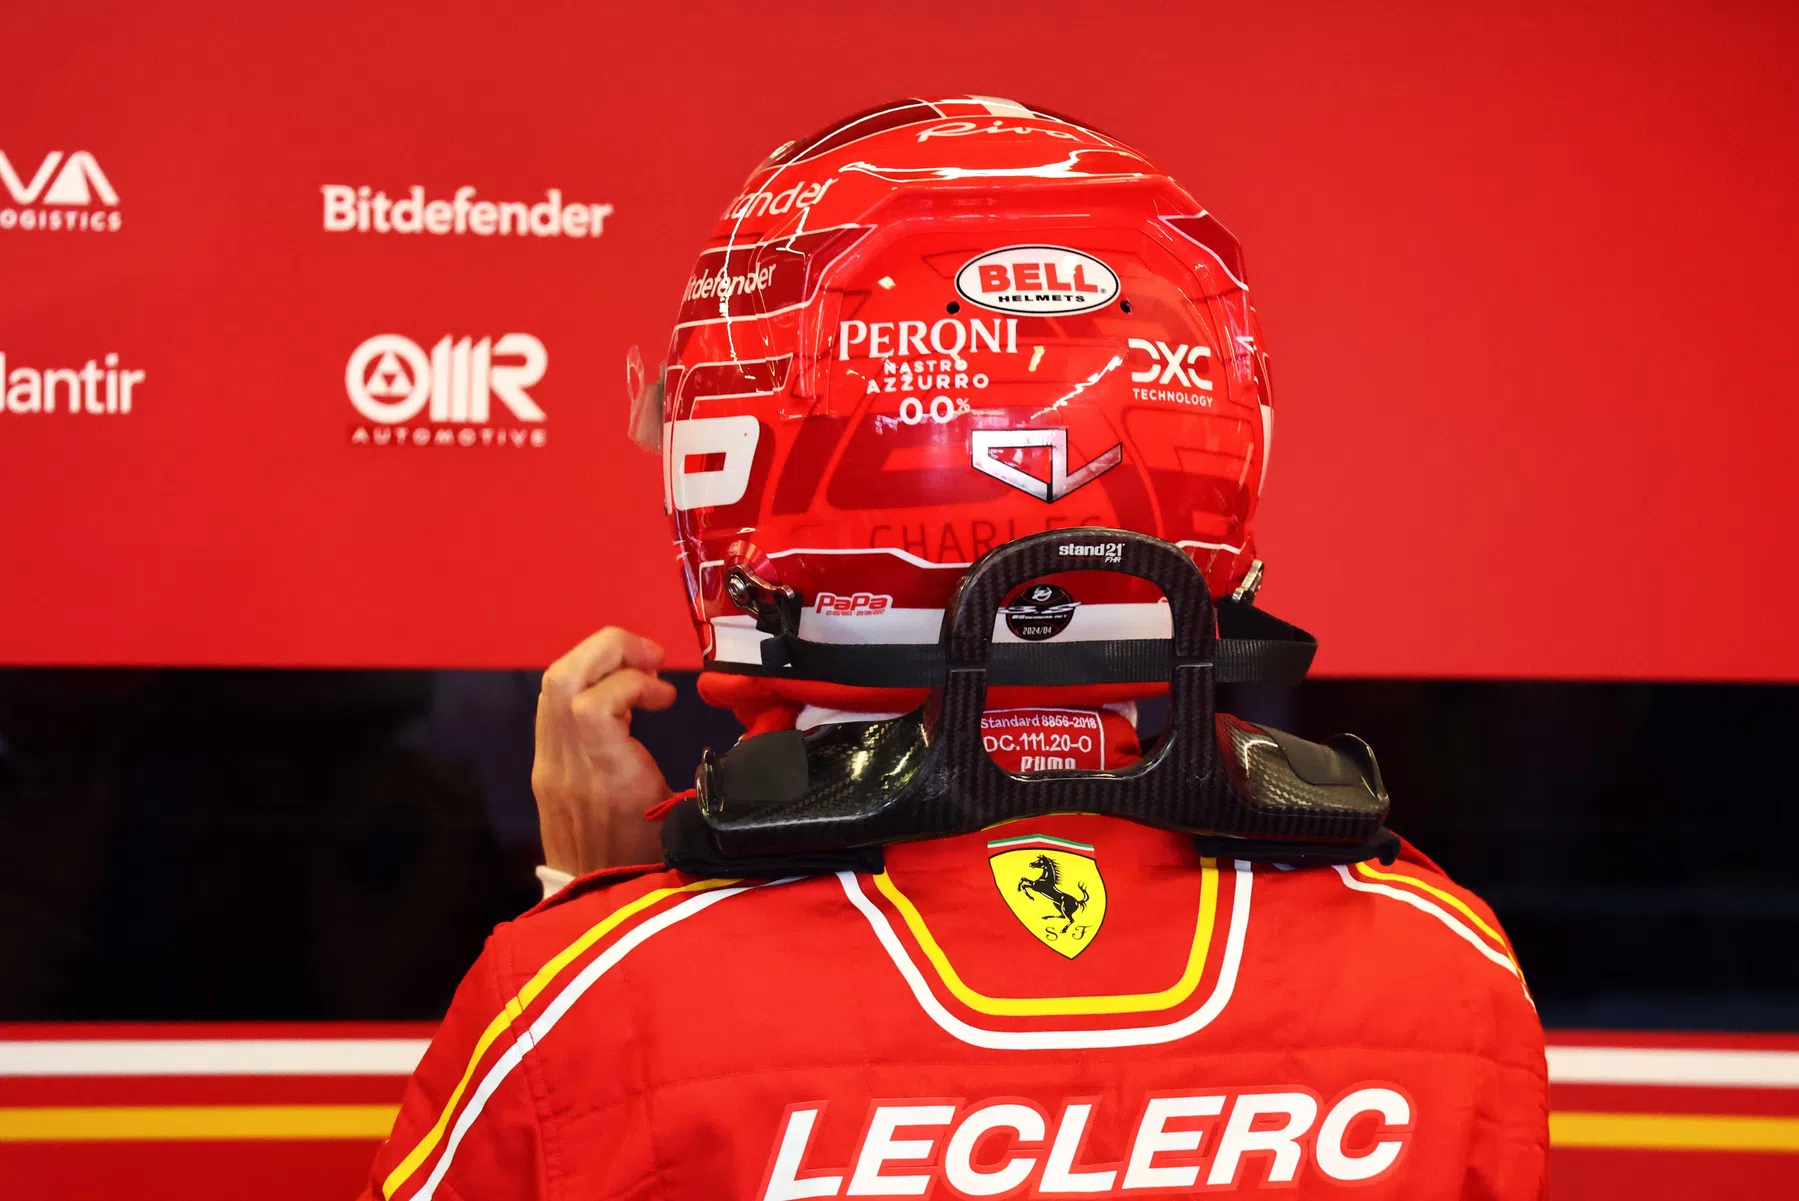 Leclerc knows when he has best chances of winning